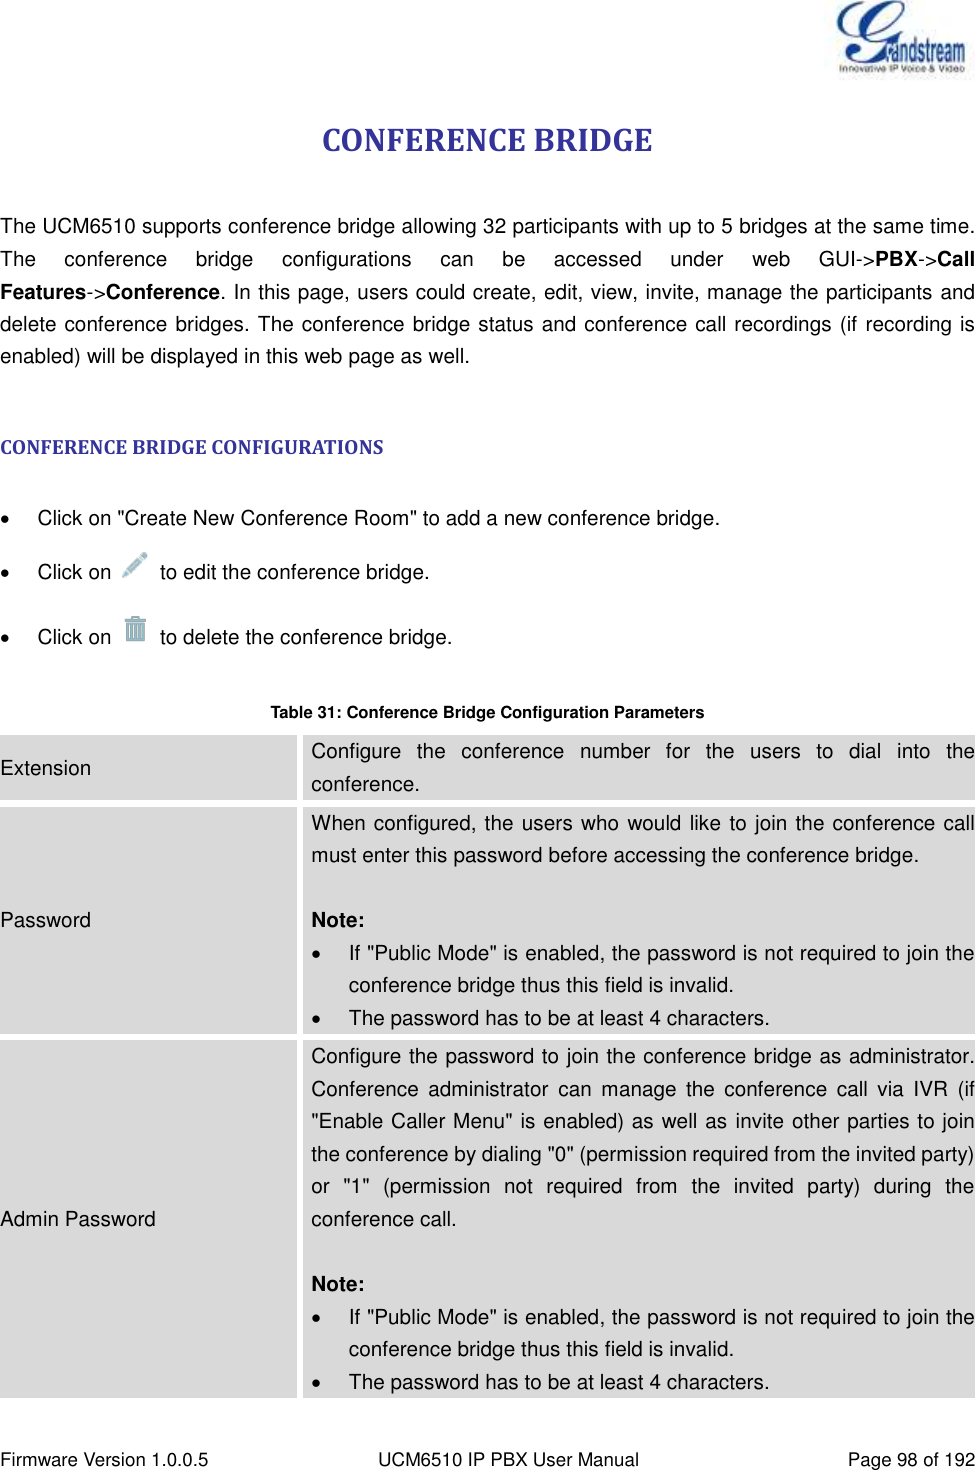  Firmware Version 1.0.0.5 UCM6510 IP PBX User Manual Page 98 of 192  CONFERENCE BRIDGE  The UCM6510 supports conference bridge allowing 32 participants with up to 5 bridges at the same time. The  conference  bridge  configurations  can  be  accessed  under  web  GUI-&gt;PBX-&gt;Call Features-&gt;Conference. In this page, users could create, edit, view, invite, manage the participants and delete conference bridges. The conference bridge status and conference call recordings (if recording is enabled) will be displayed in this web page as well.  CONFERENCE BRIDGE CONFIGURATIONS    Click on &quot;Create New Conference Room&quot; to add a new conference bridge.   Click on    to edit the conference bridge.   Click on    to delete the conference bridge.  Table 31: Conference Bridge Configuration Parameters Extension Configure  the  conference  number  for  the  users  to  dial  into  the conference. Password When configured, the users who would like to join the conference call must enter this password before accessing the conference bridge.  Note:   If &quot;Public Mode&quot; is enabled, the password is not required to join the conference bridge thus this field is invalid.   The password has to be at least 4 characters. Admin Password Configure the password to join the conference bridge as administrator. Conference  administrator  can  manage  the  conference  call  via  IVR  (if &quot;Enable Caller Menu&quot; is enabled) as well as invite other parties to join the conference by dialing &quot;0&quot; (permission required from the invited party) or  &quot;1&quot;  (permission  not  required  from  the  invited  party)  during  the conference call.  Note:   If &quot;Public Mode&quot; is enabled, the password is not required to join the conference bridge thus this field is invalid.   The password has to be at least 4 characters. 